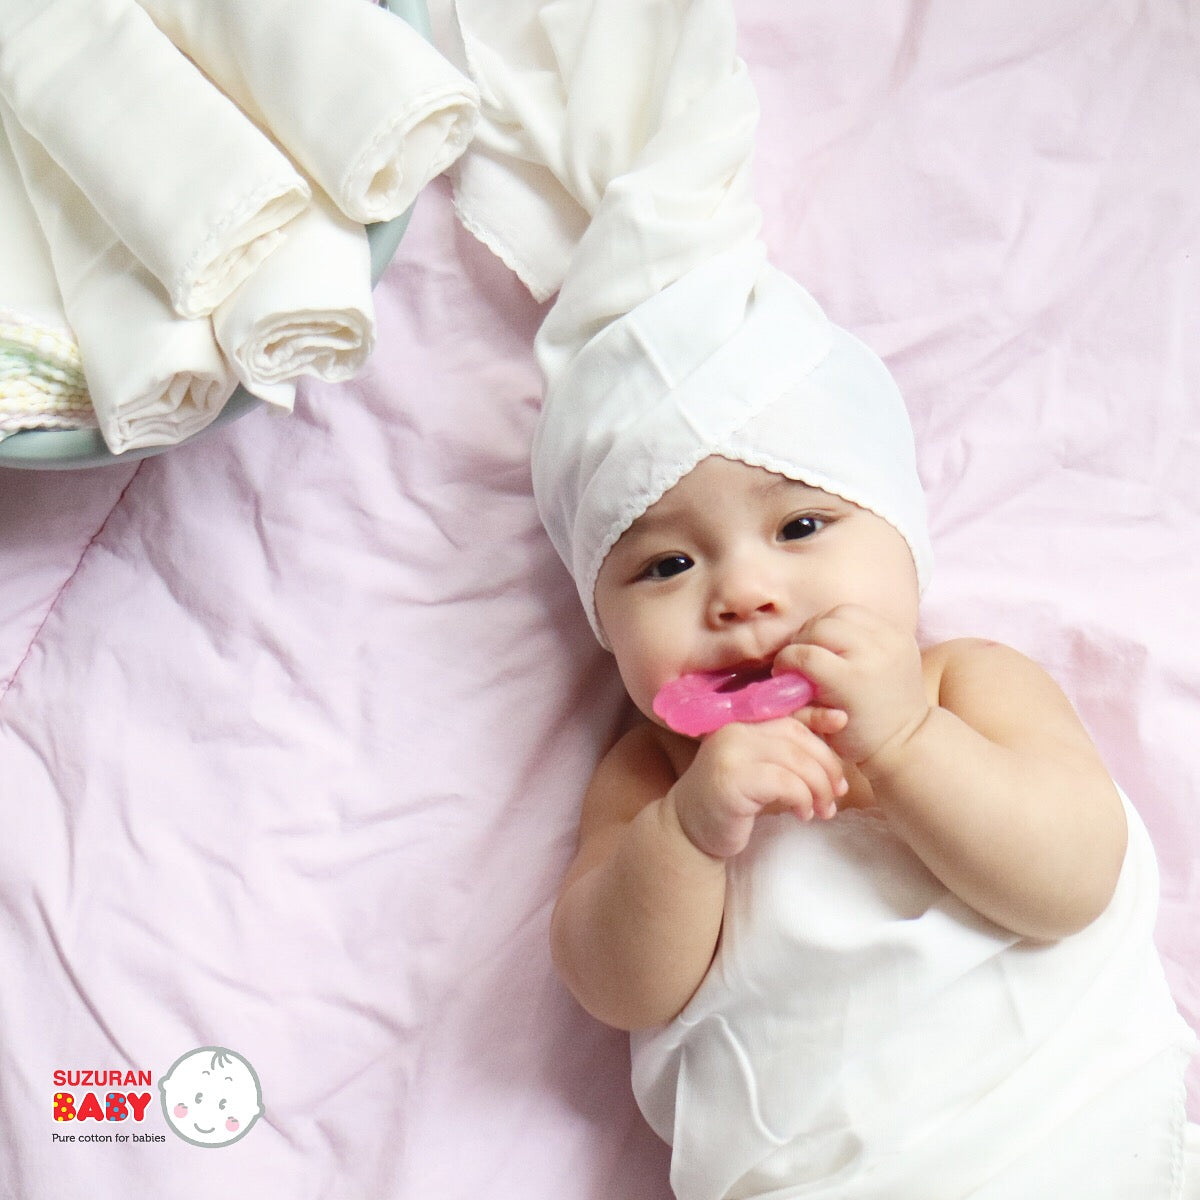 Swaddle Bath - A Better Experience for You and Your Newborn